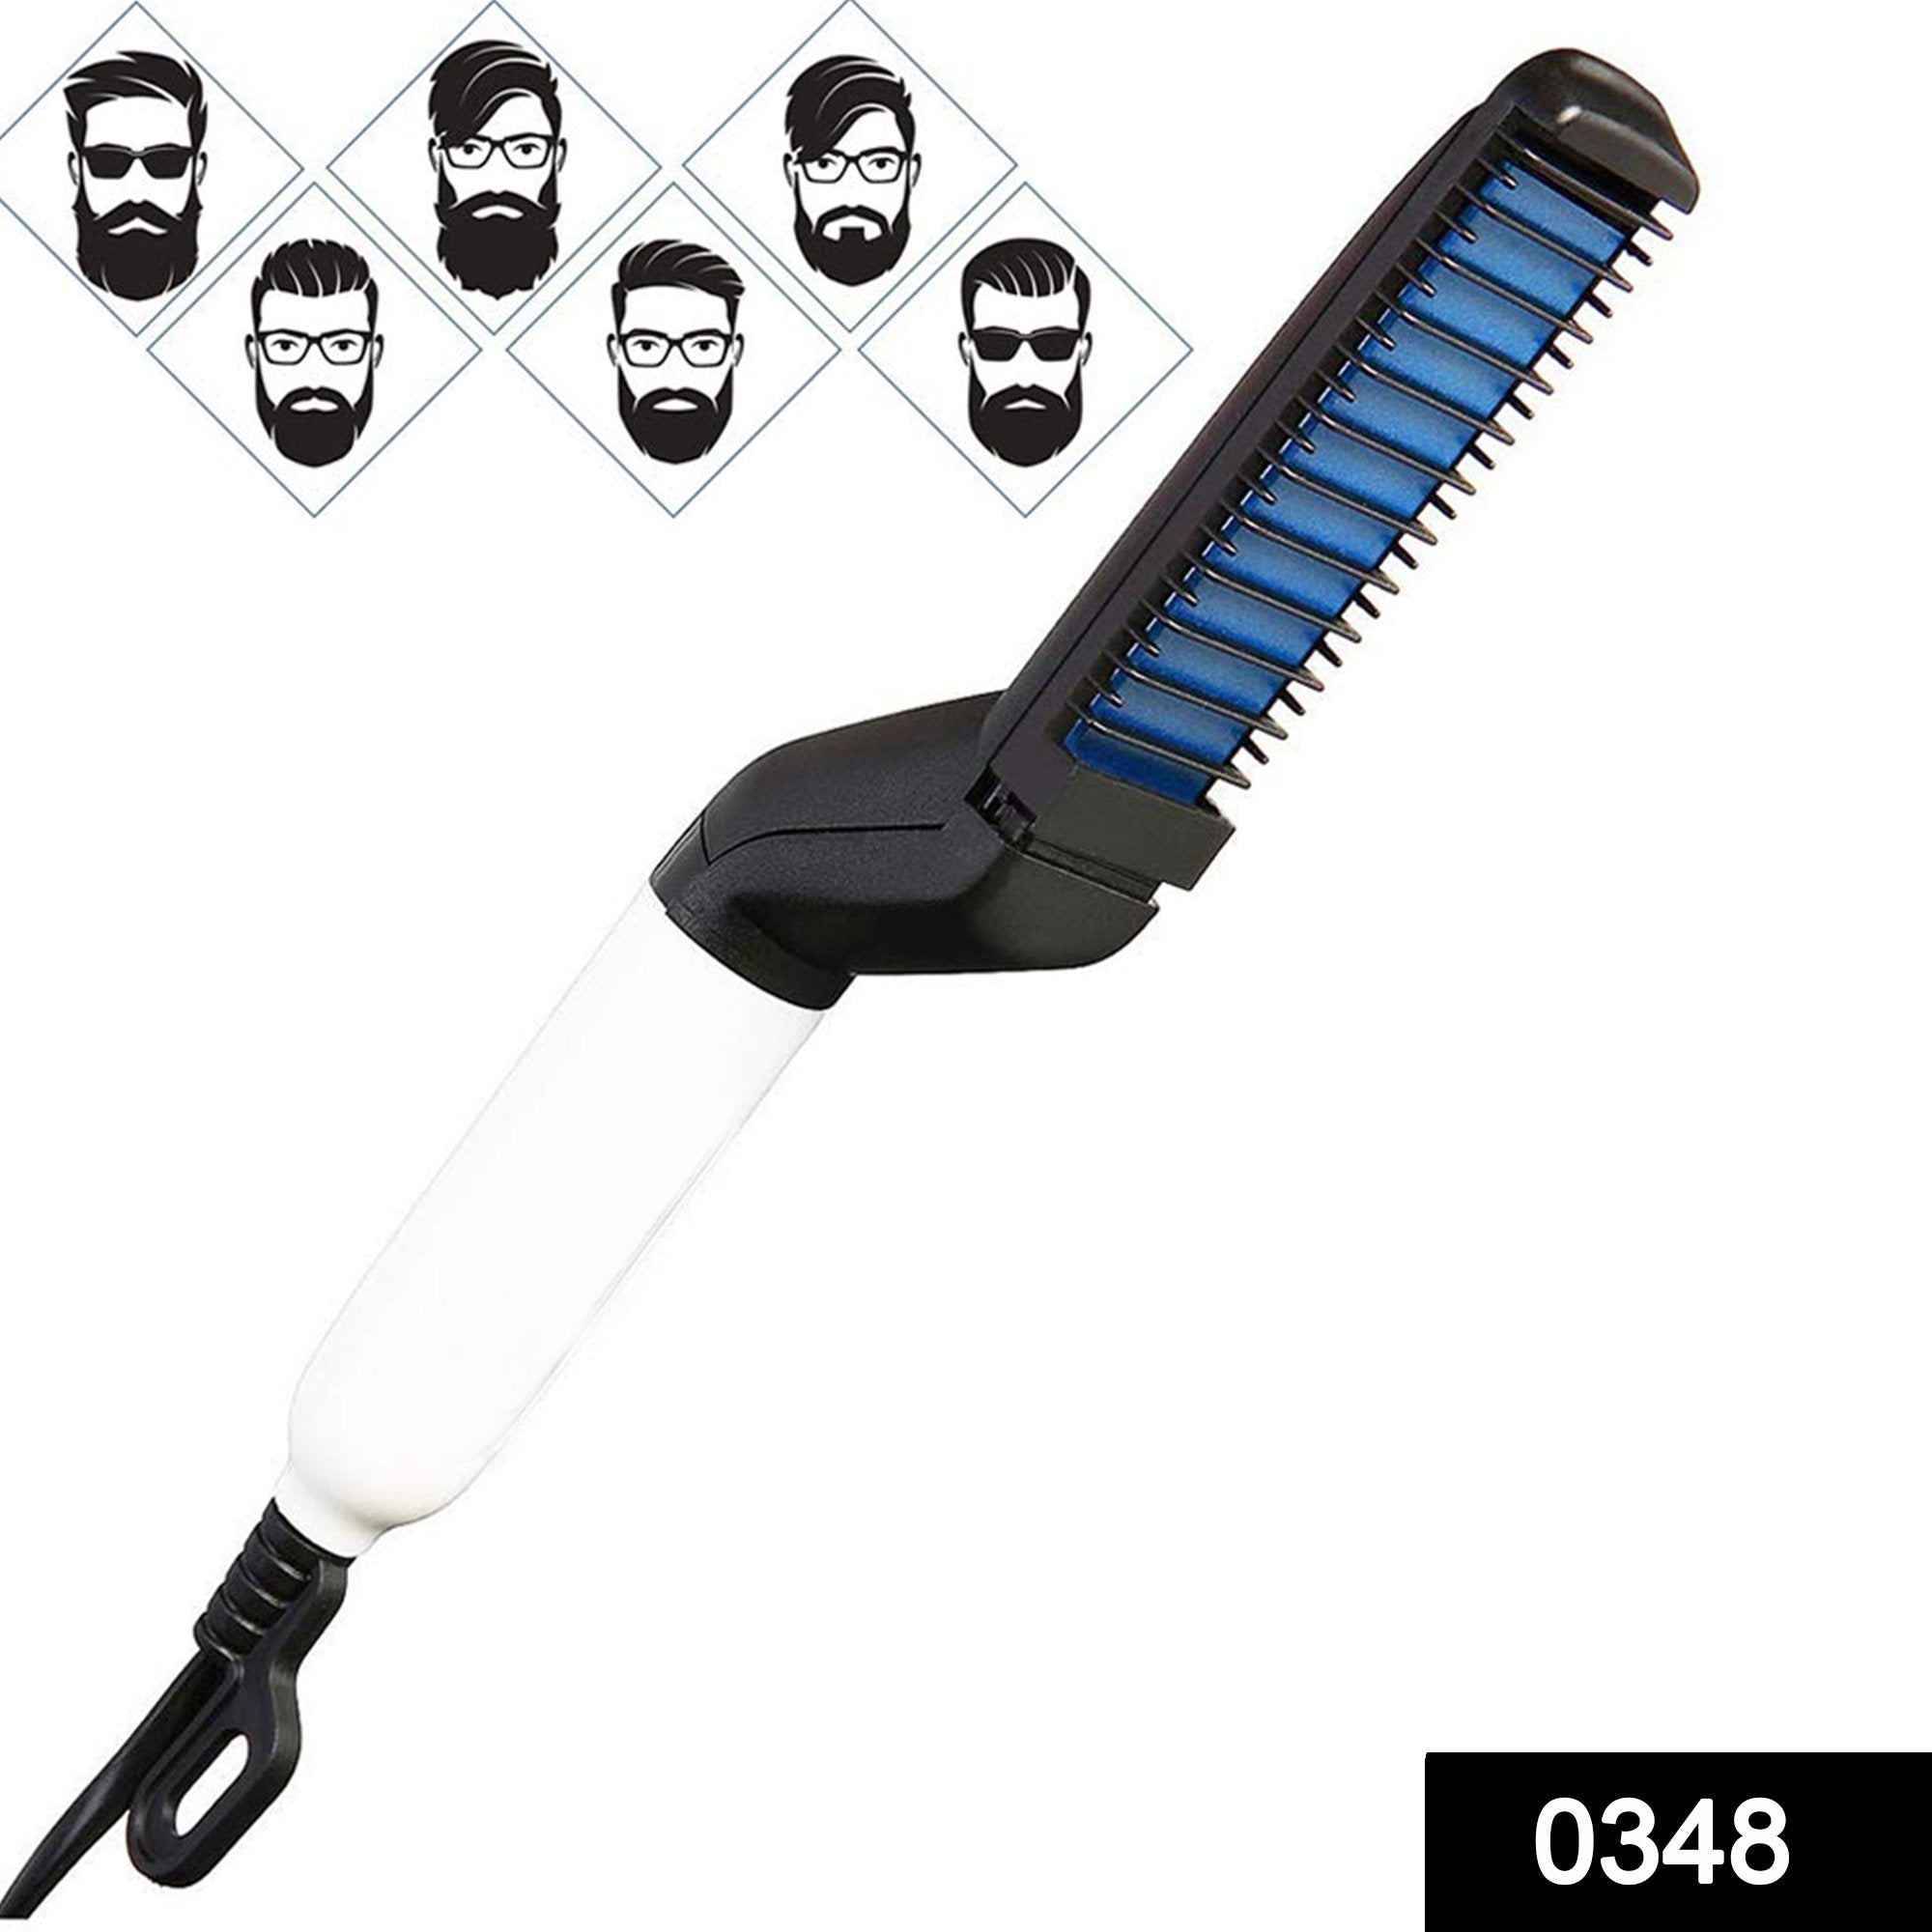 ambitionofcreativity in personal care mens beard and hair curling straightener modelling comb